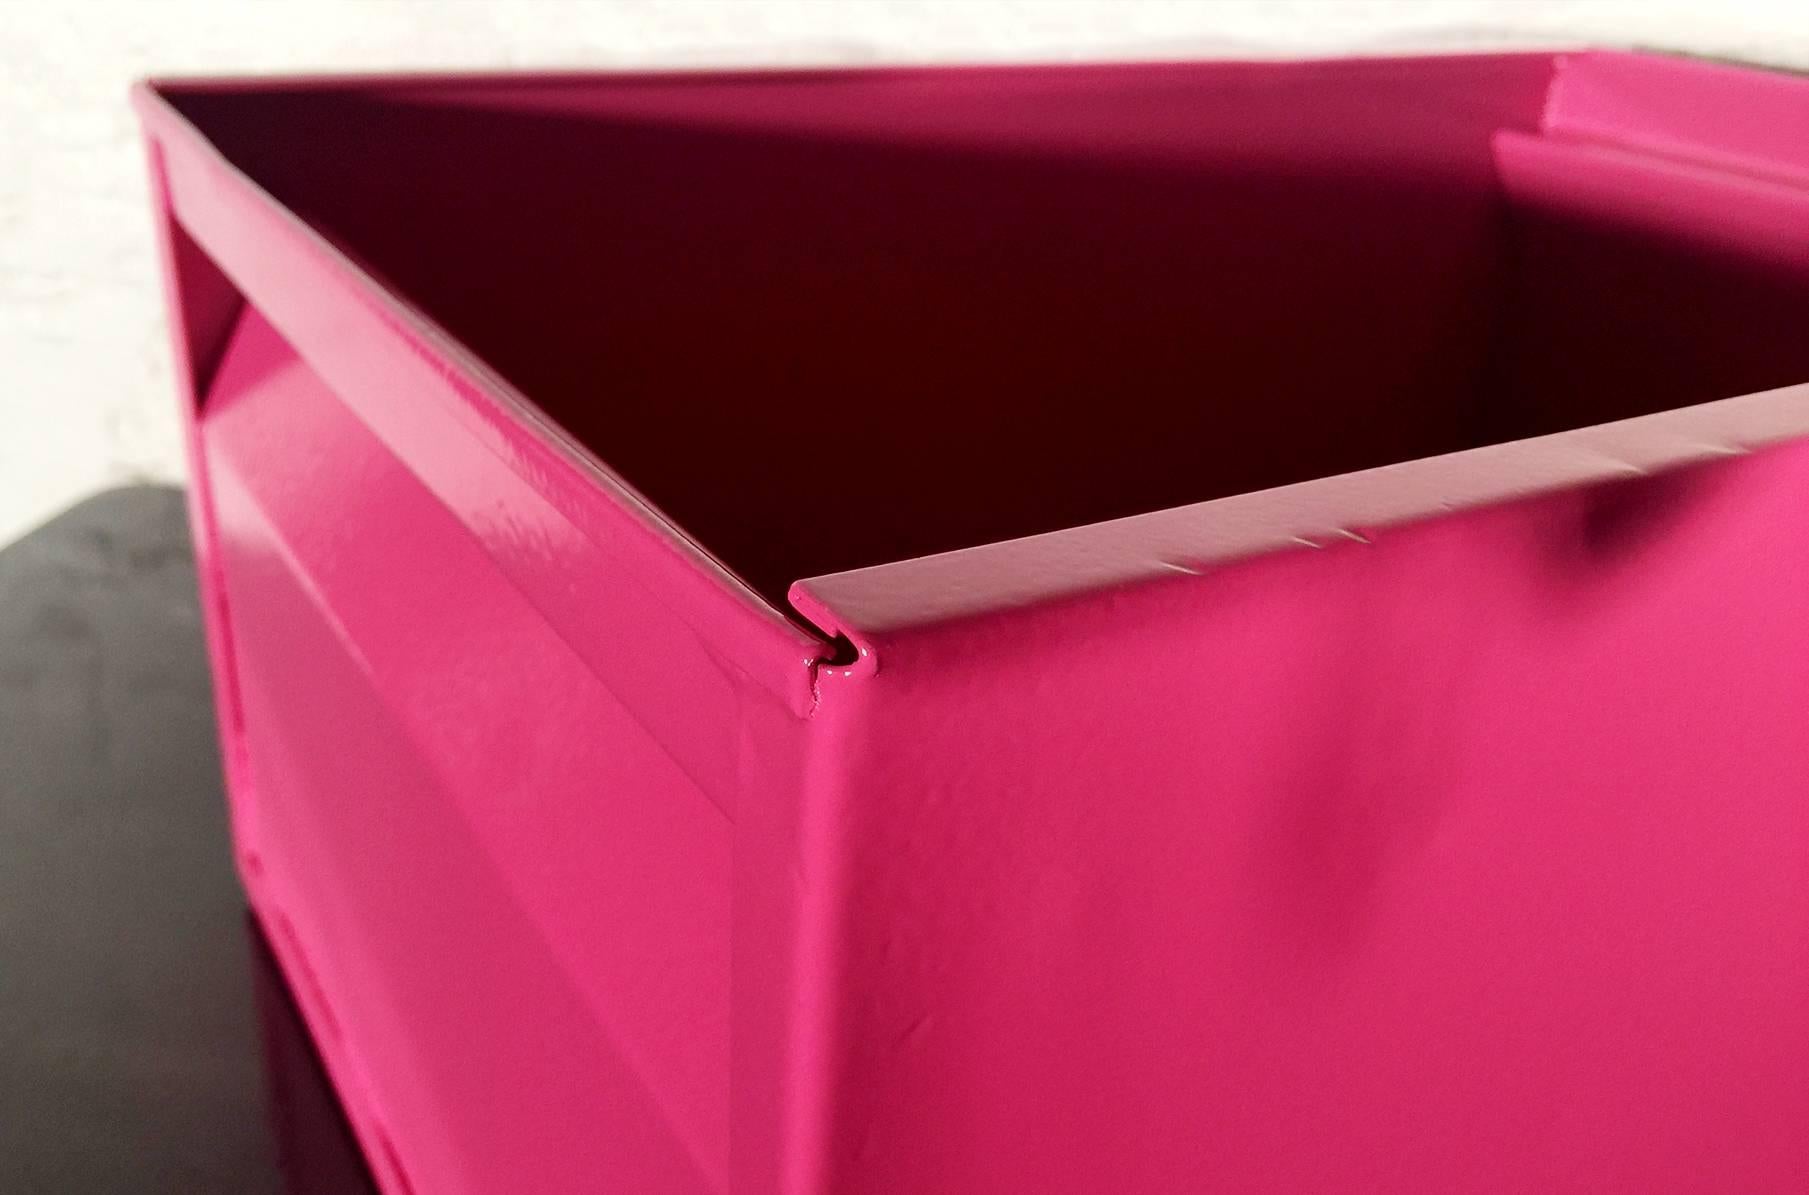 Powder-Coated 1940s Industrial Storage Bin, Refinished in Pink